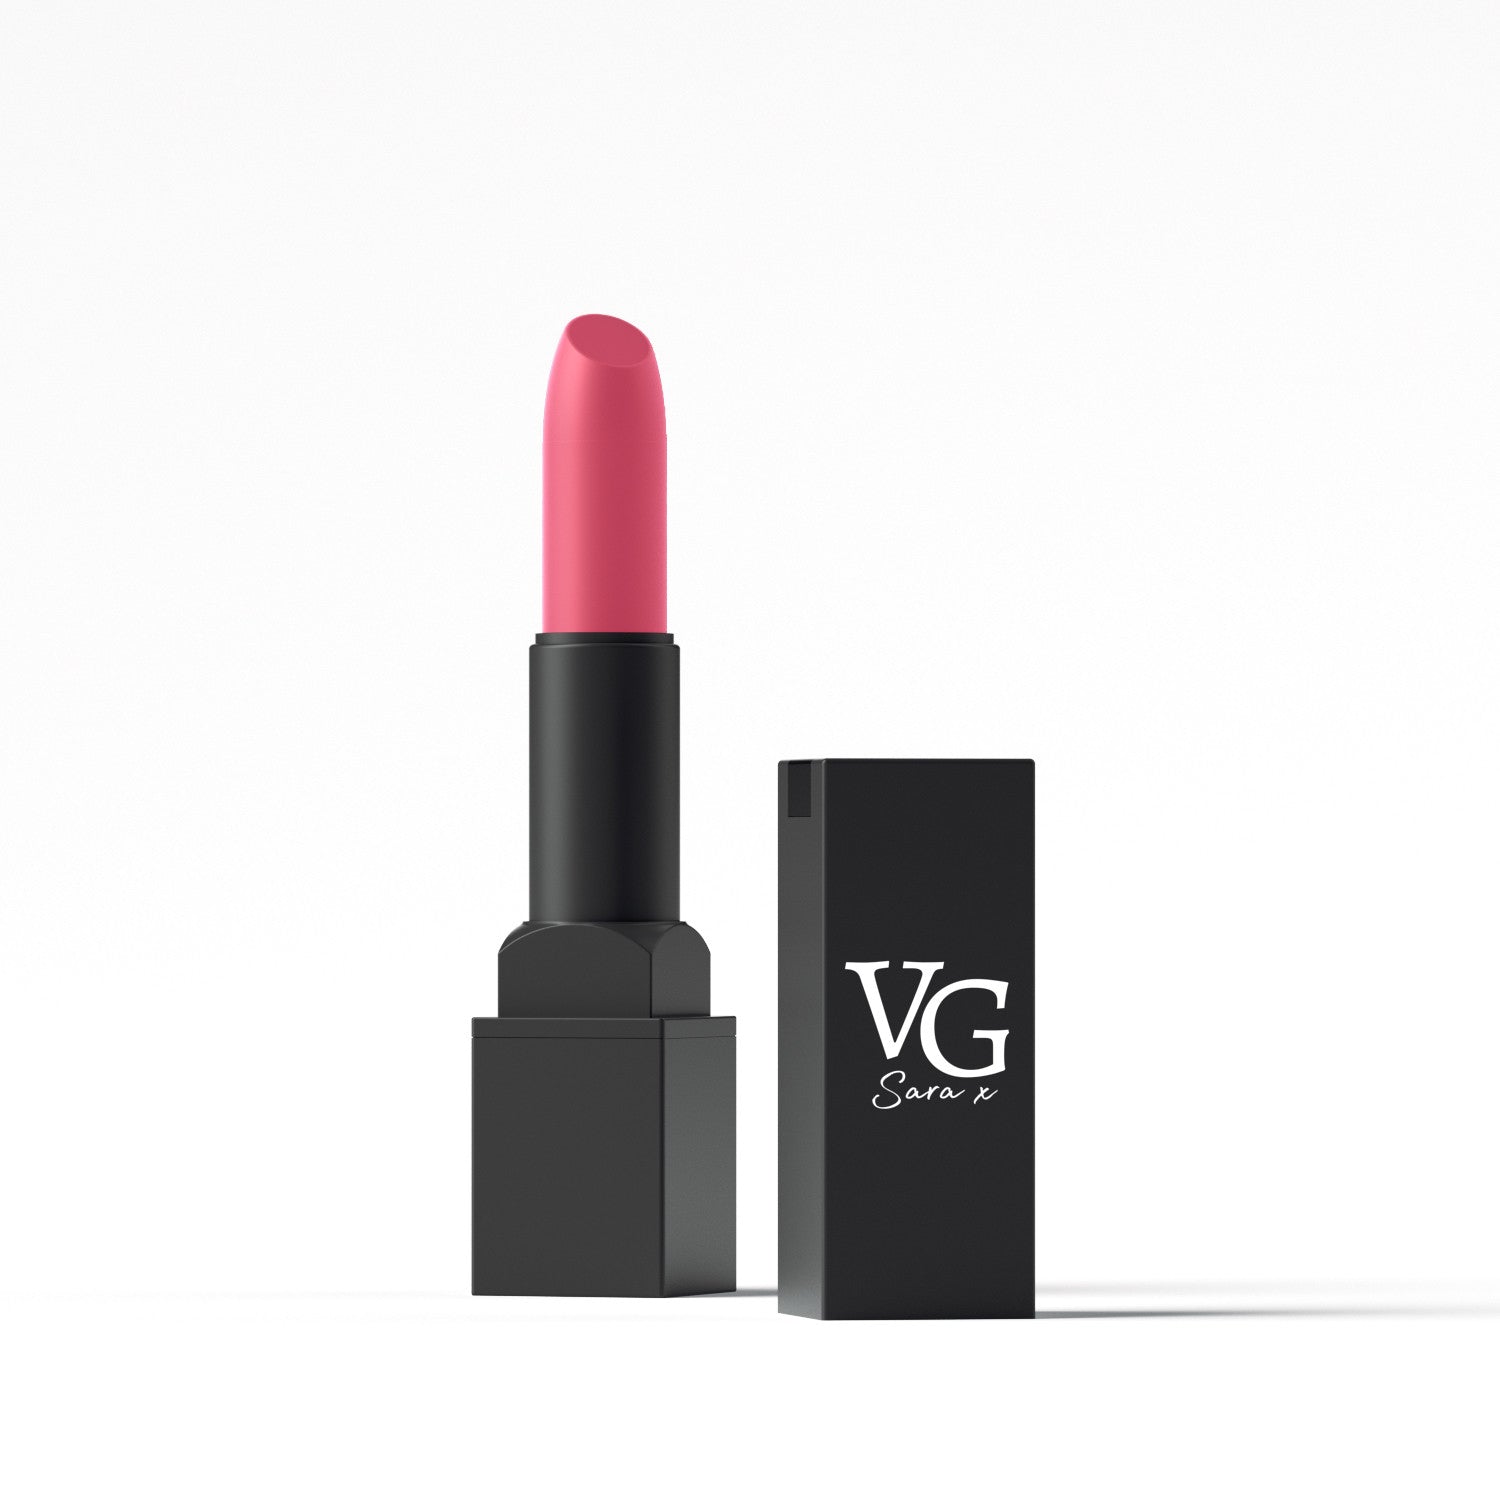 VG branded lipstick showcased with its original container